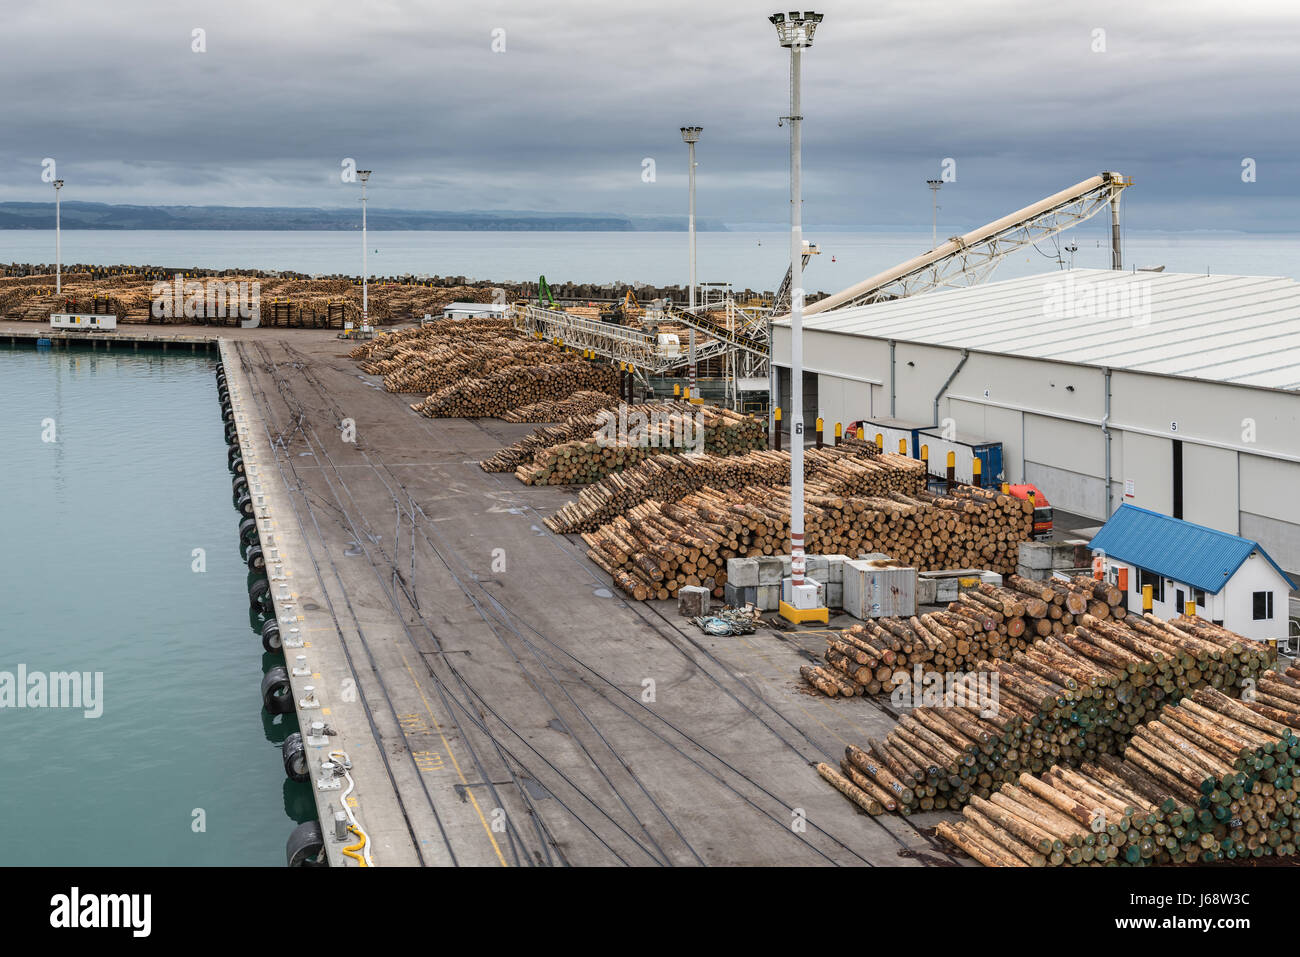 Napier, New Zealand - March 9, 2017: Overview of part of large timber harbor under cloudy sky. Heaps of brown tree trunks sawed at fixed length. Pacif Stock Photo